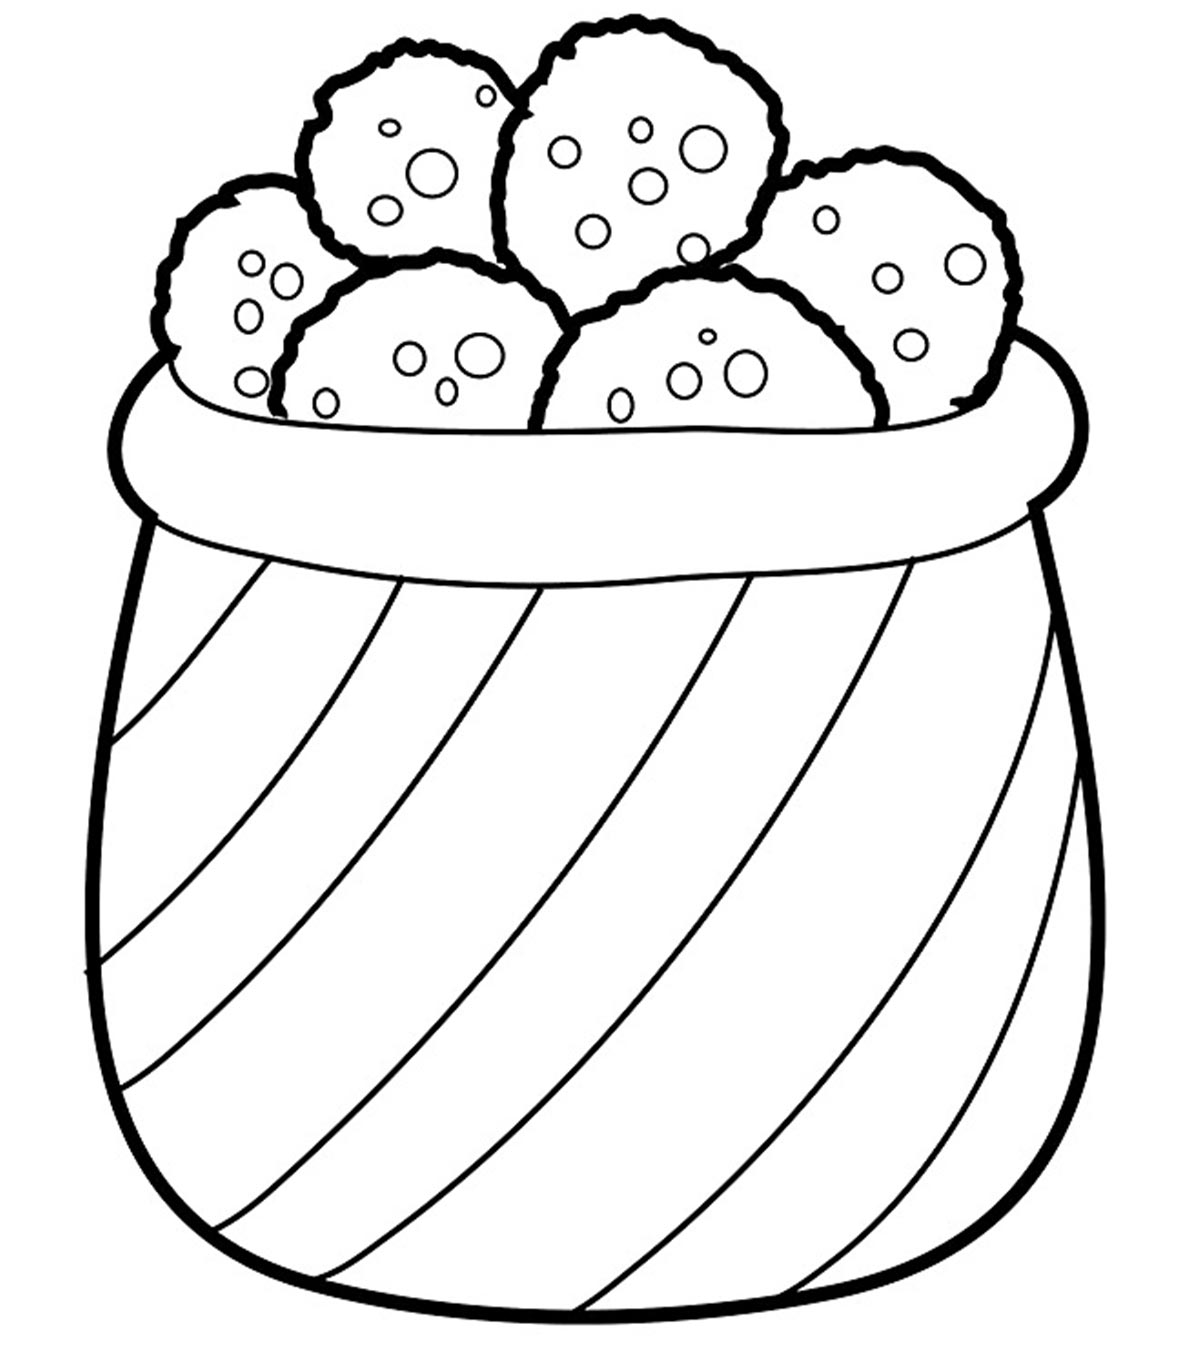 Coloring Pages | Yummy Cookies Coloring Pages For Your Little Ones